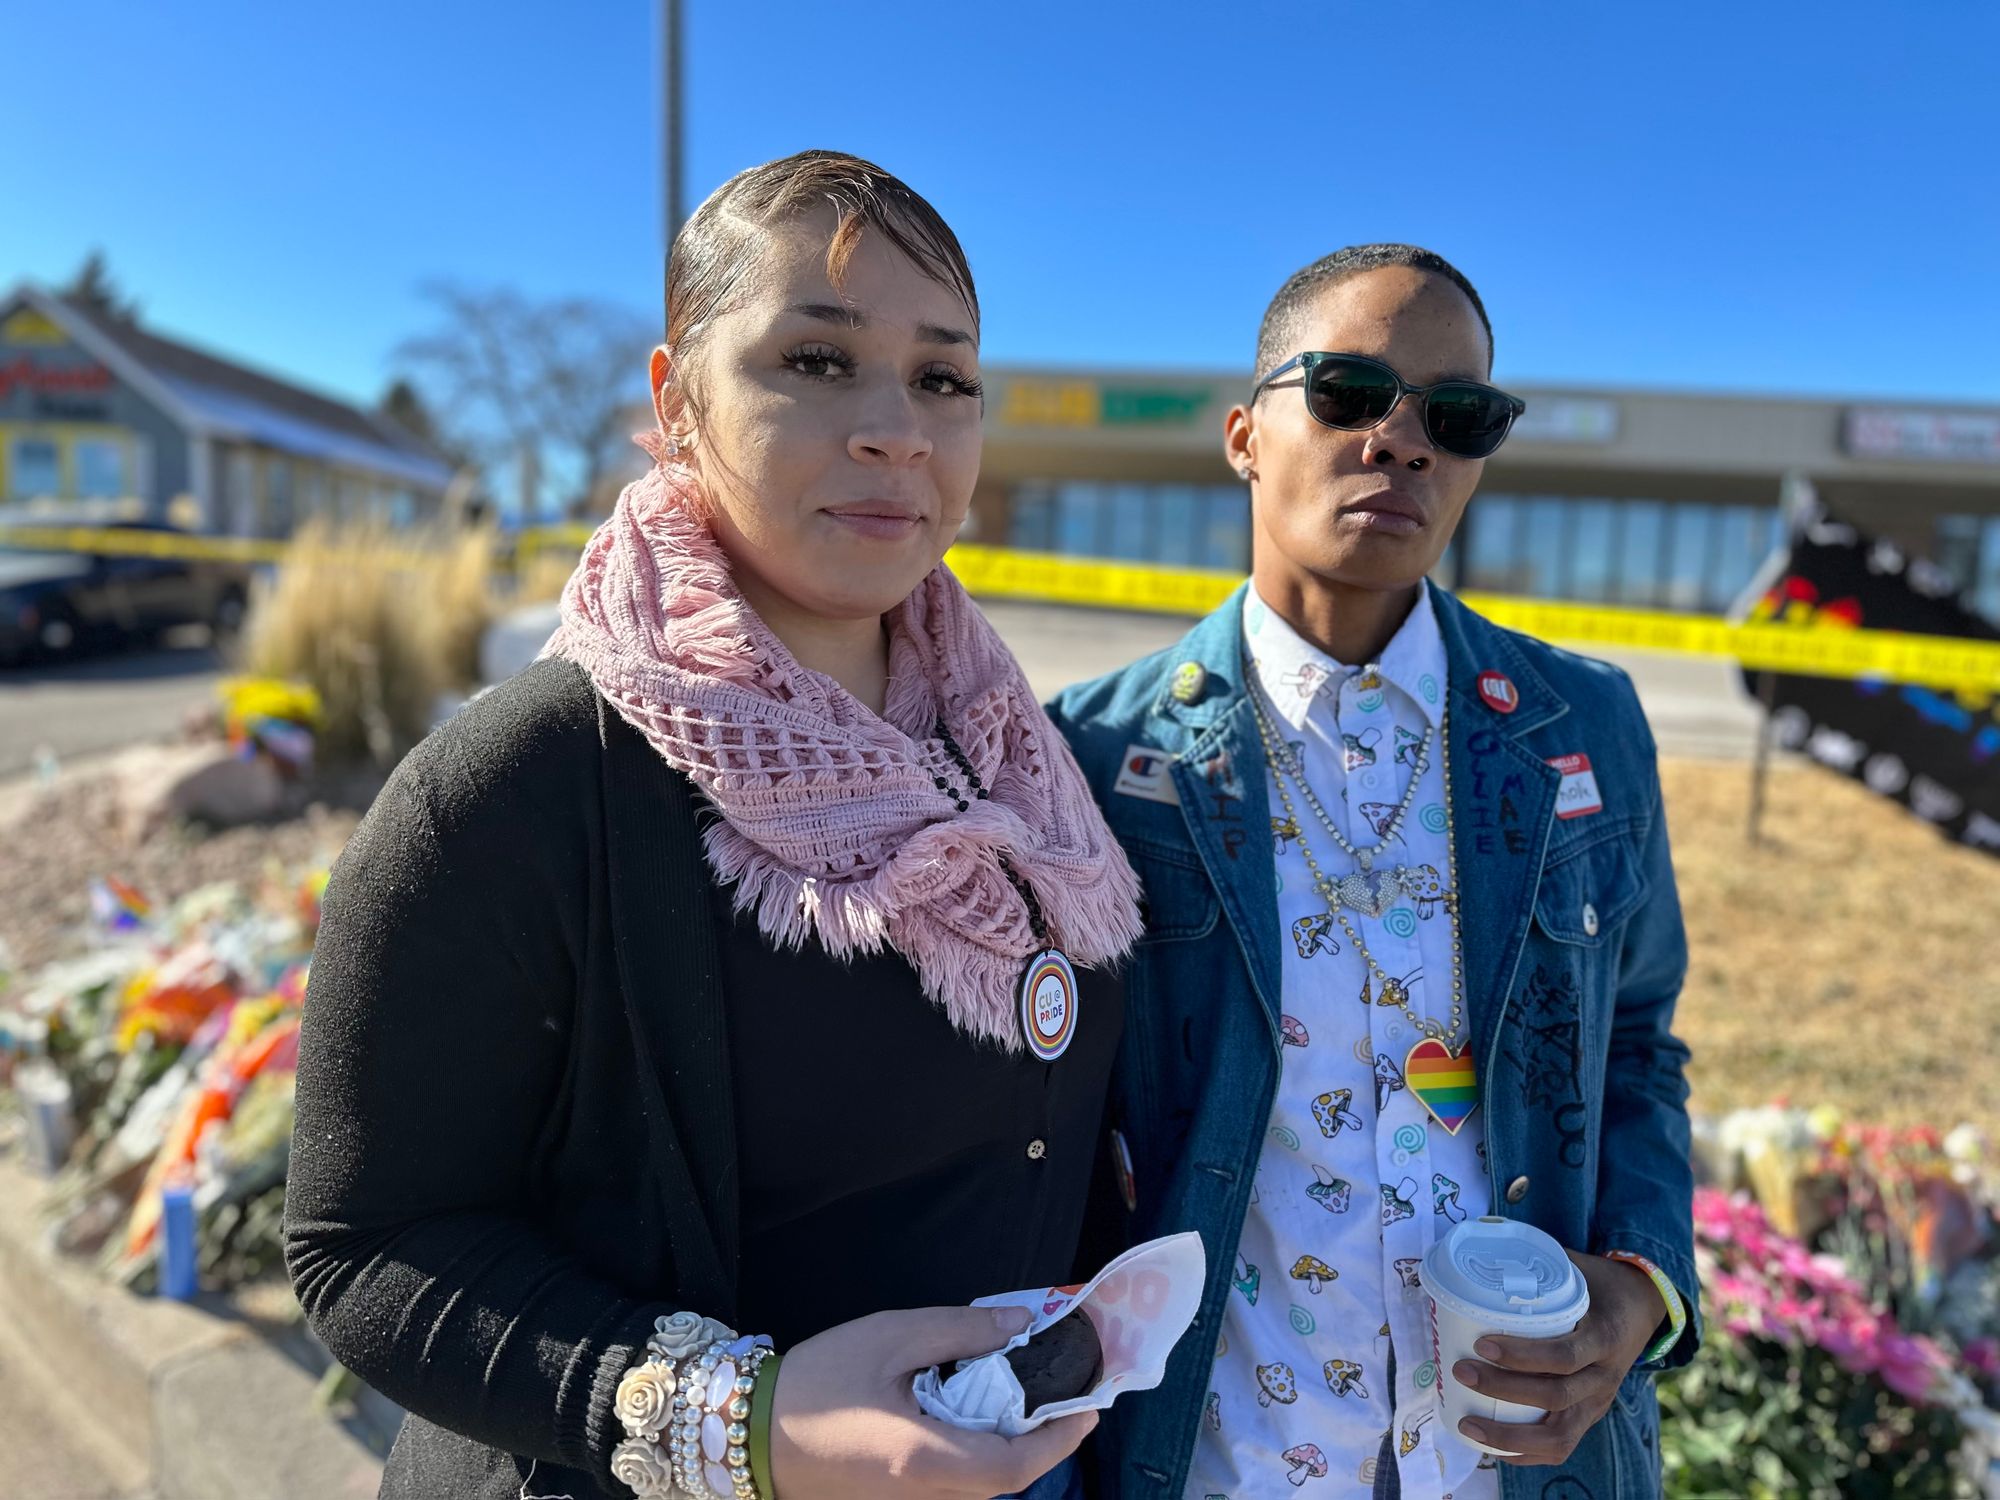 Queer resilience after Club Q shooting: 'We're not afraid'